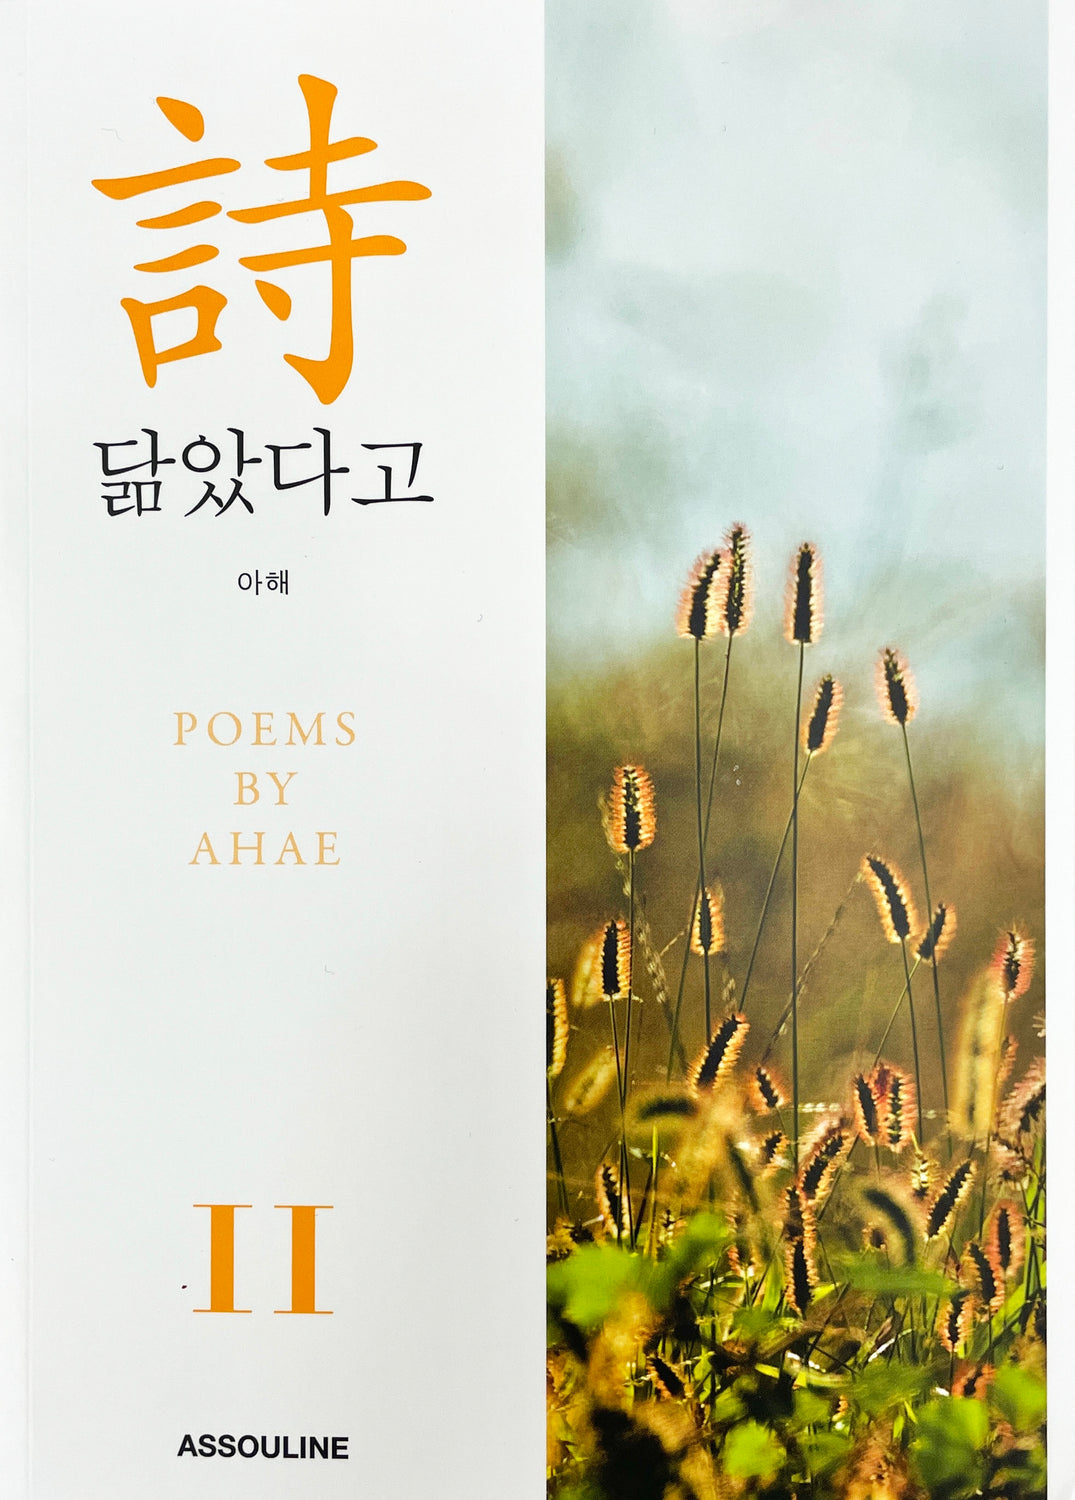 Poems by Ahae Vol. 11 - Assouline